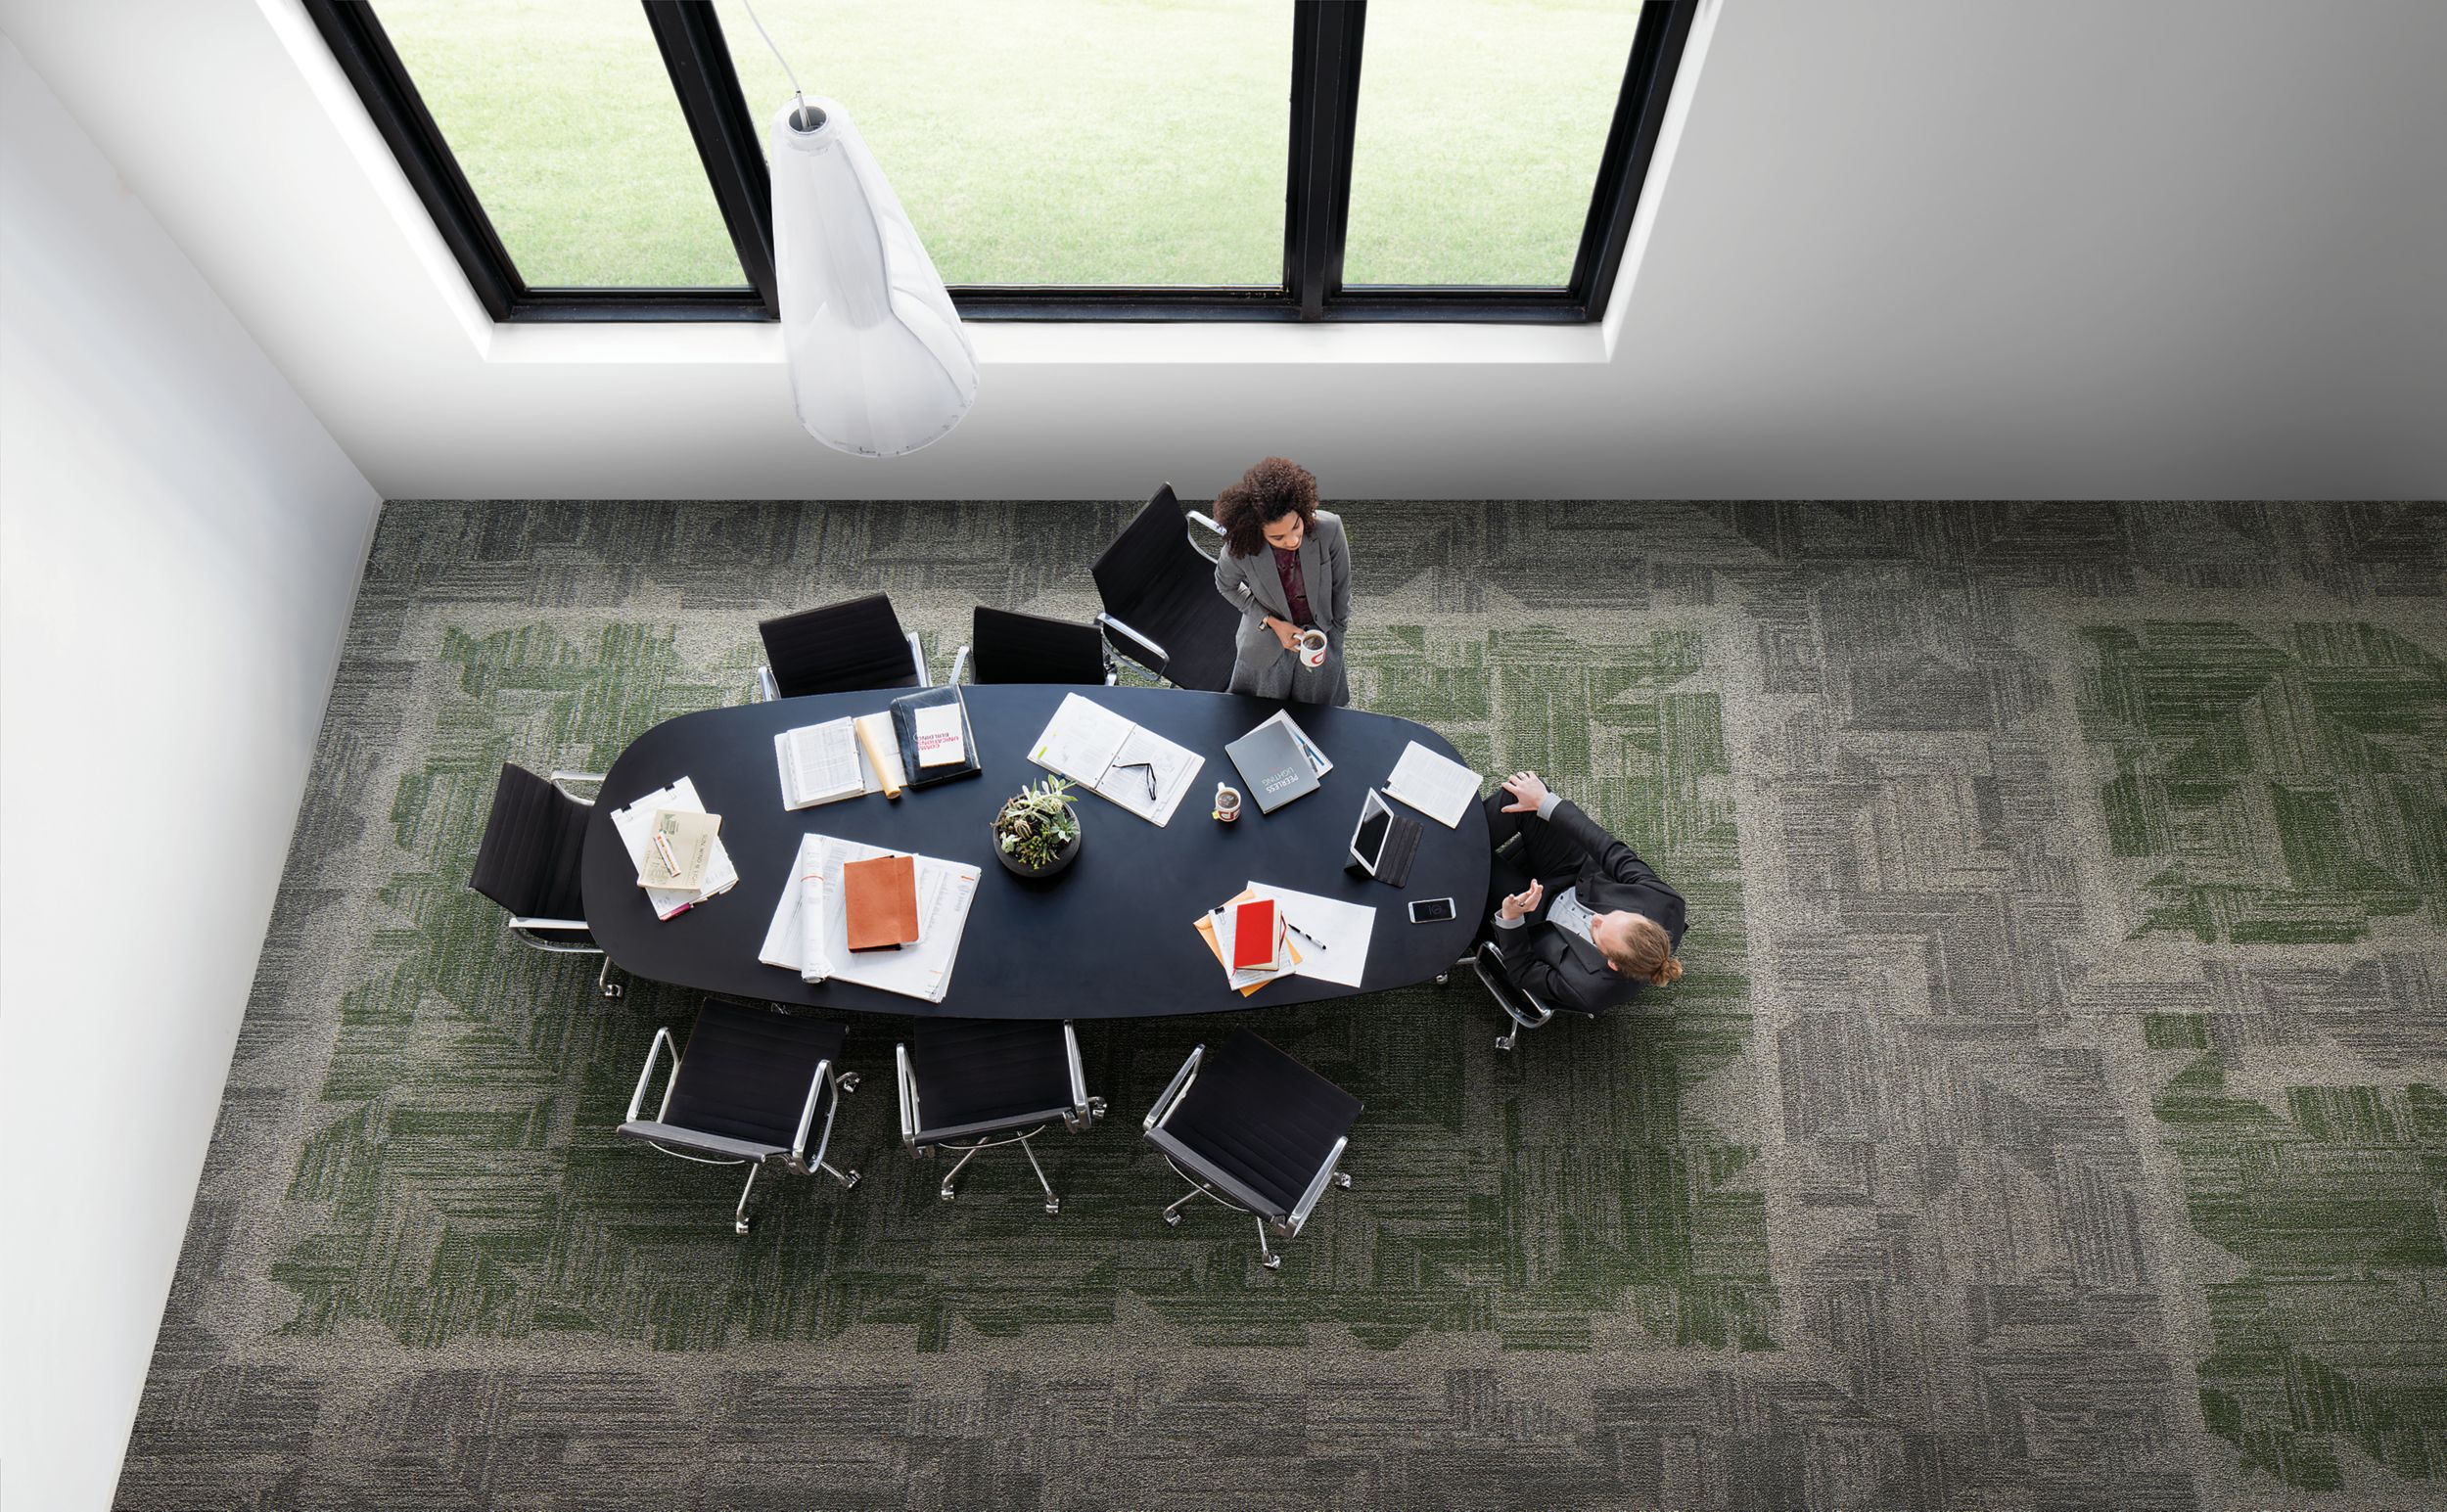 Interface Open Air 403 carpet tile in overhead view of meeting table with man and woman talking Bildnummer 1